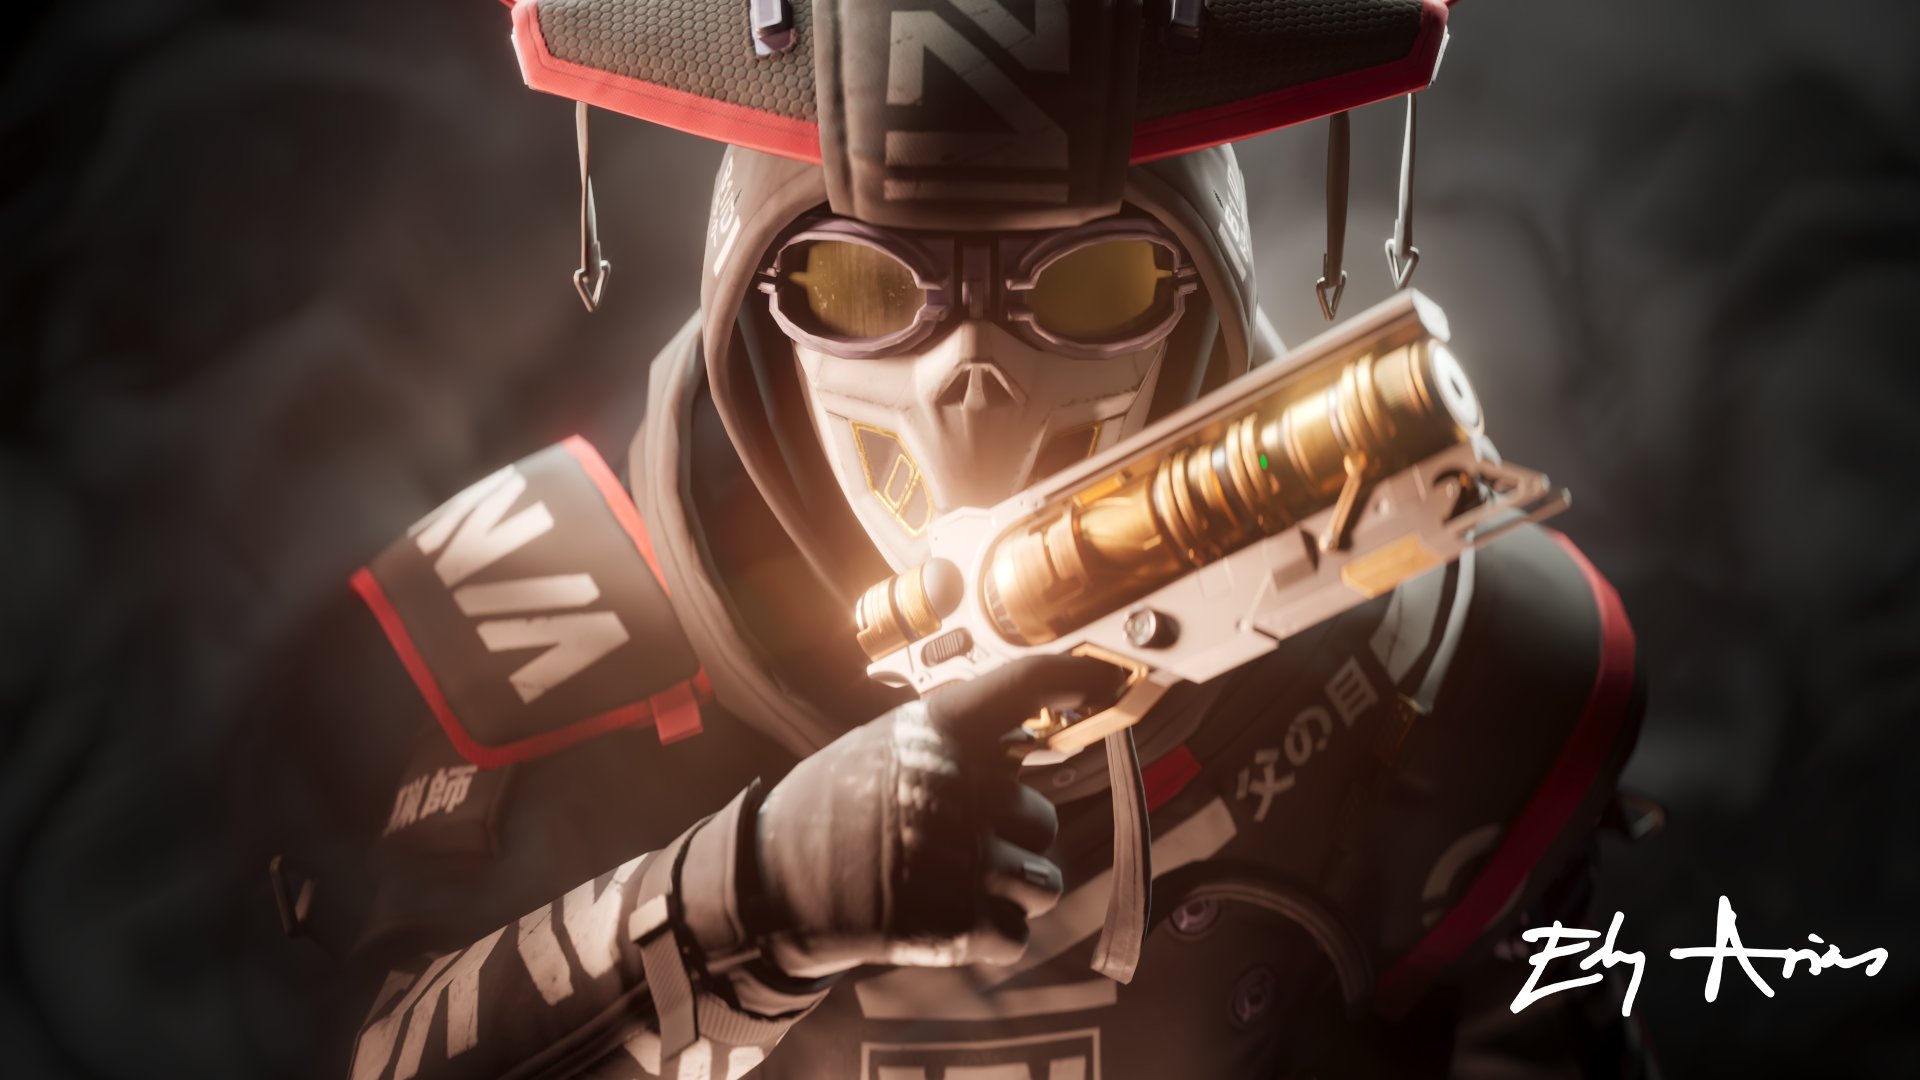 Apex Legends Bloodhound Apex Legends Video Games Video Game Characters Gun Mask 1920x1080